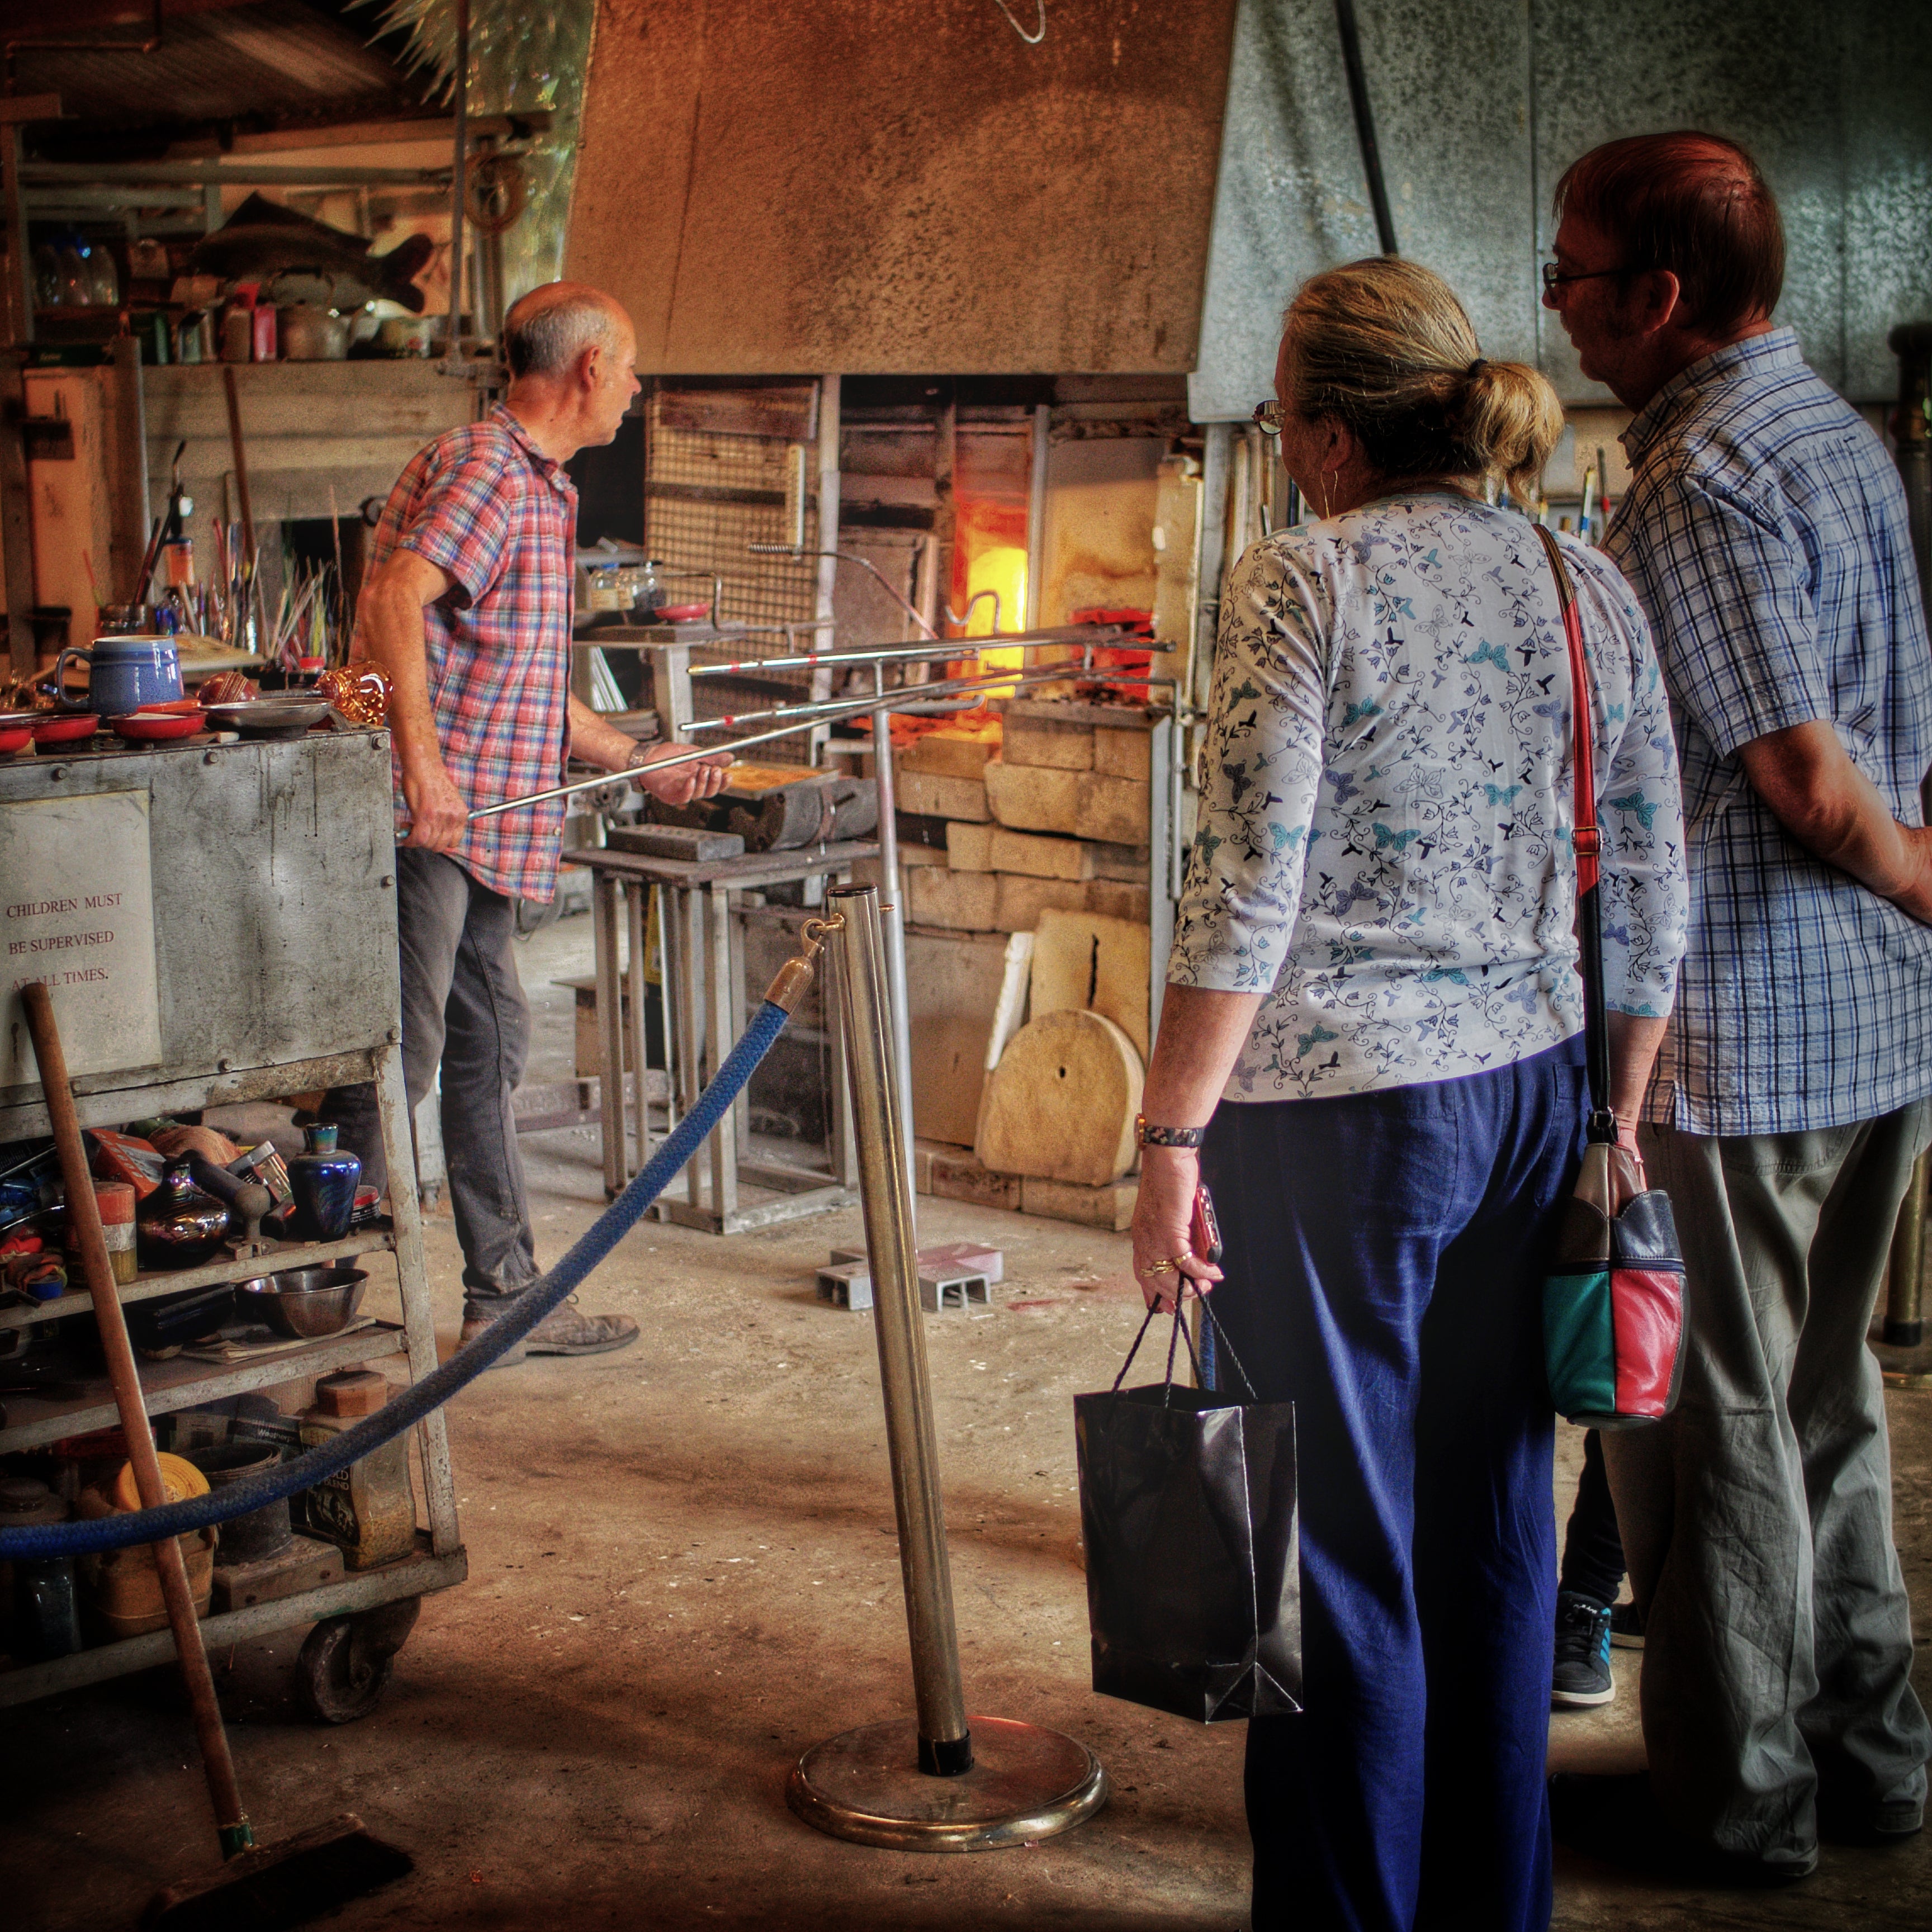 People are welcome to watch the glassblowers at work.